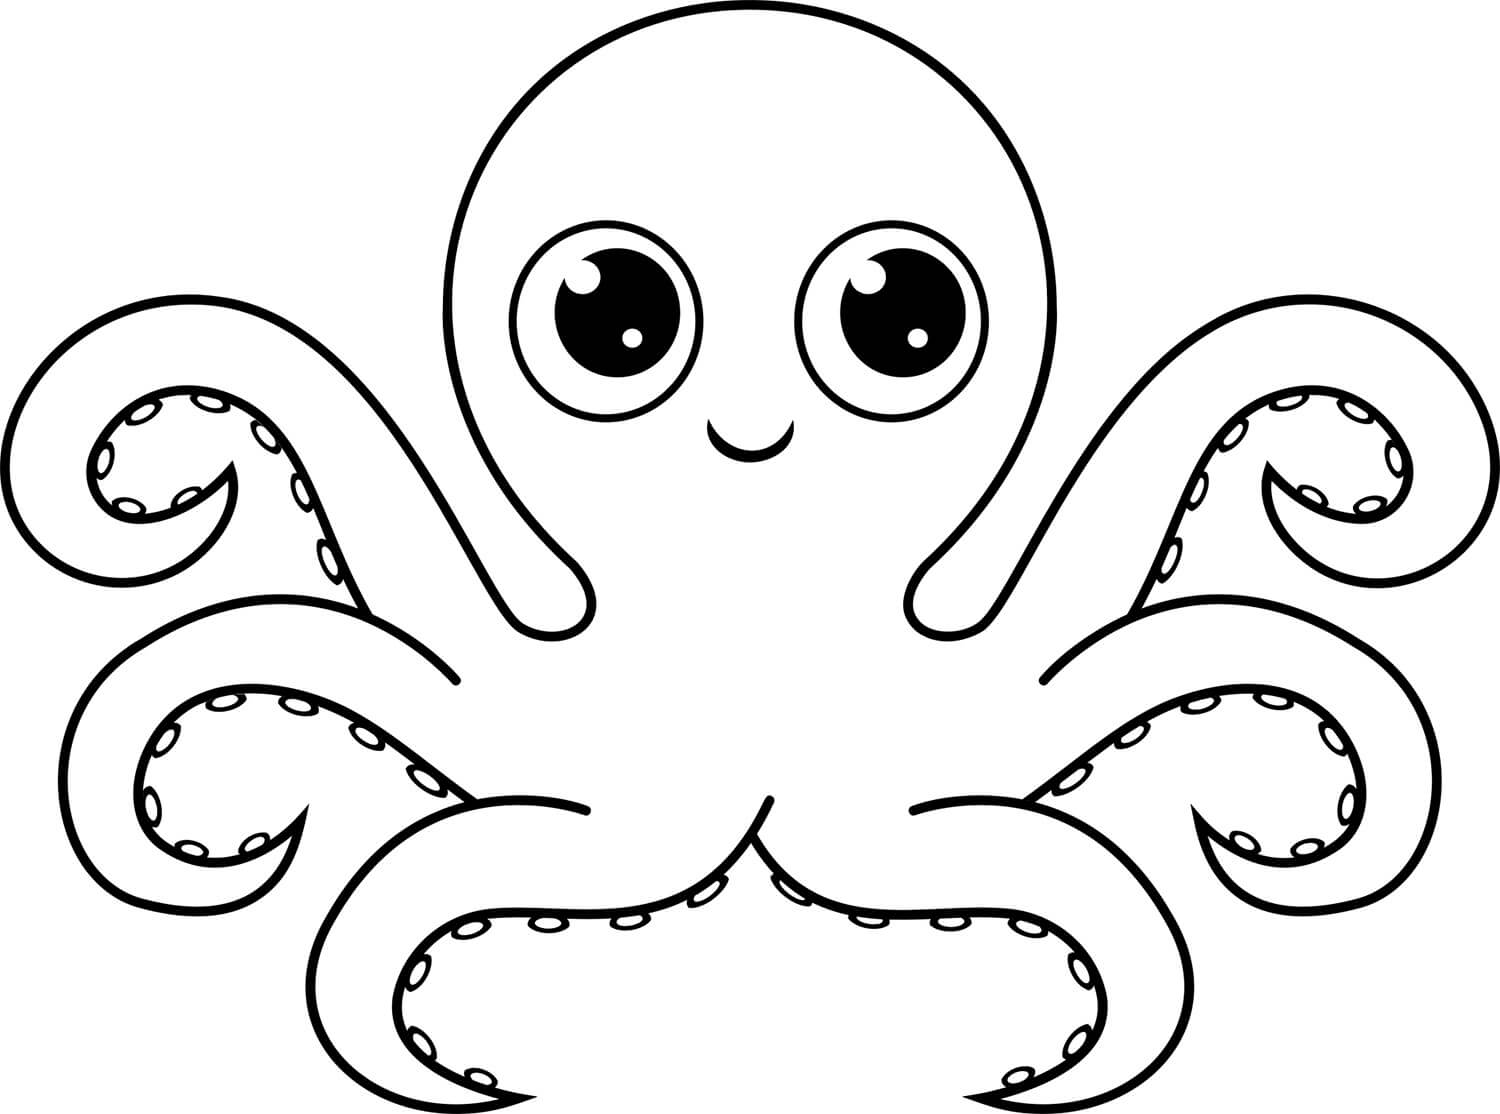 Kawaii Octopus coloring page - Download, Print or Color Online for Free